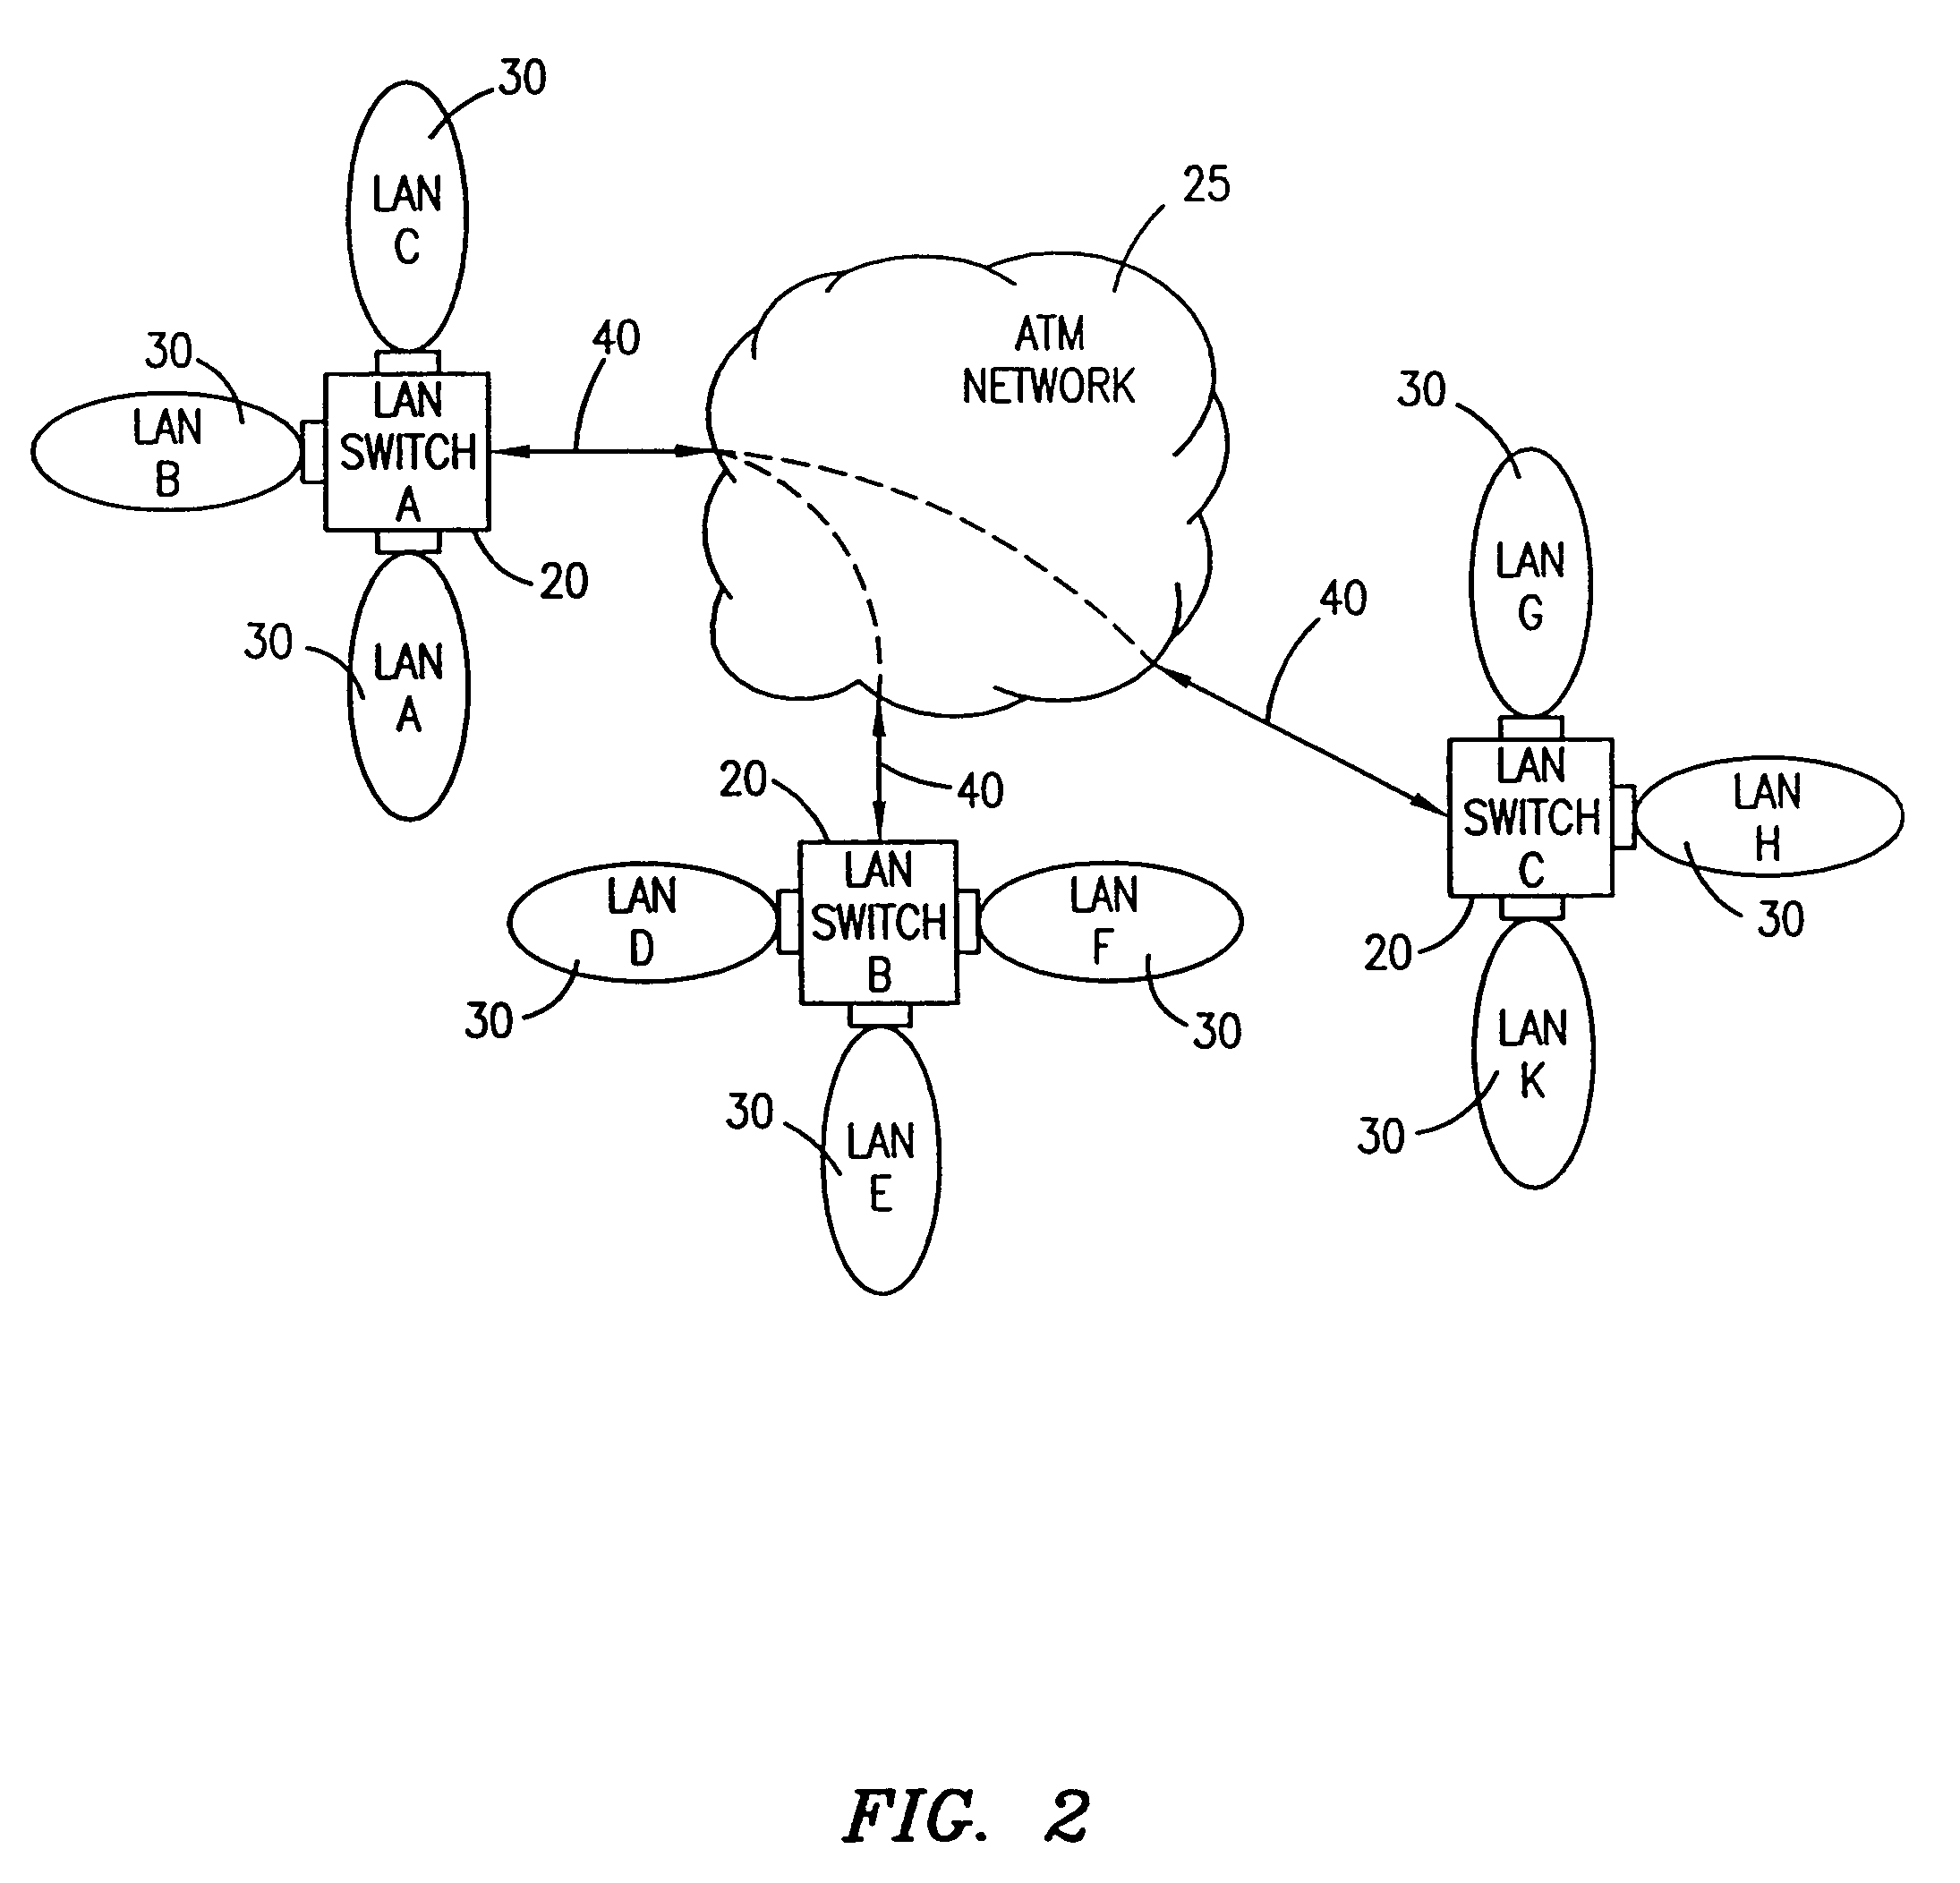 Method and apparatus for hardware forwarding of LAN frames over ATM networks